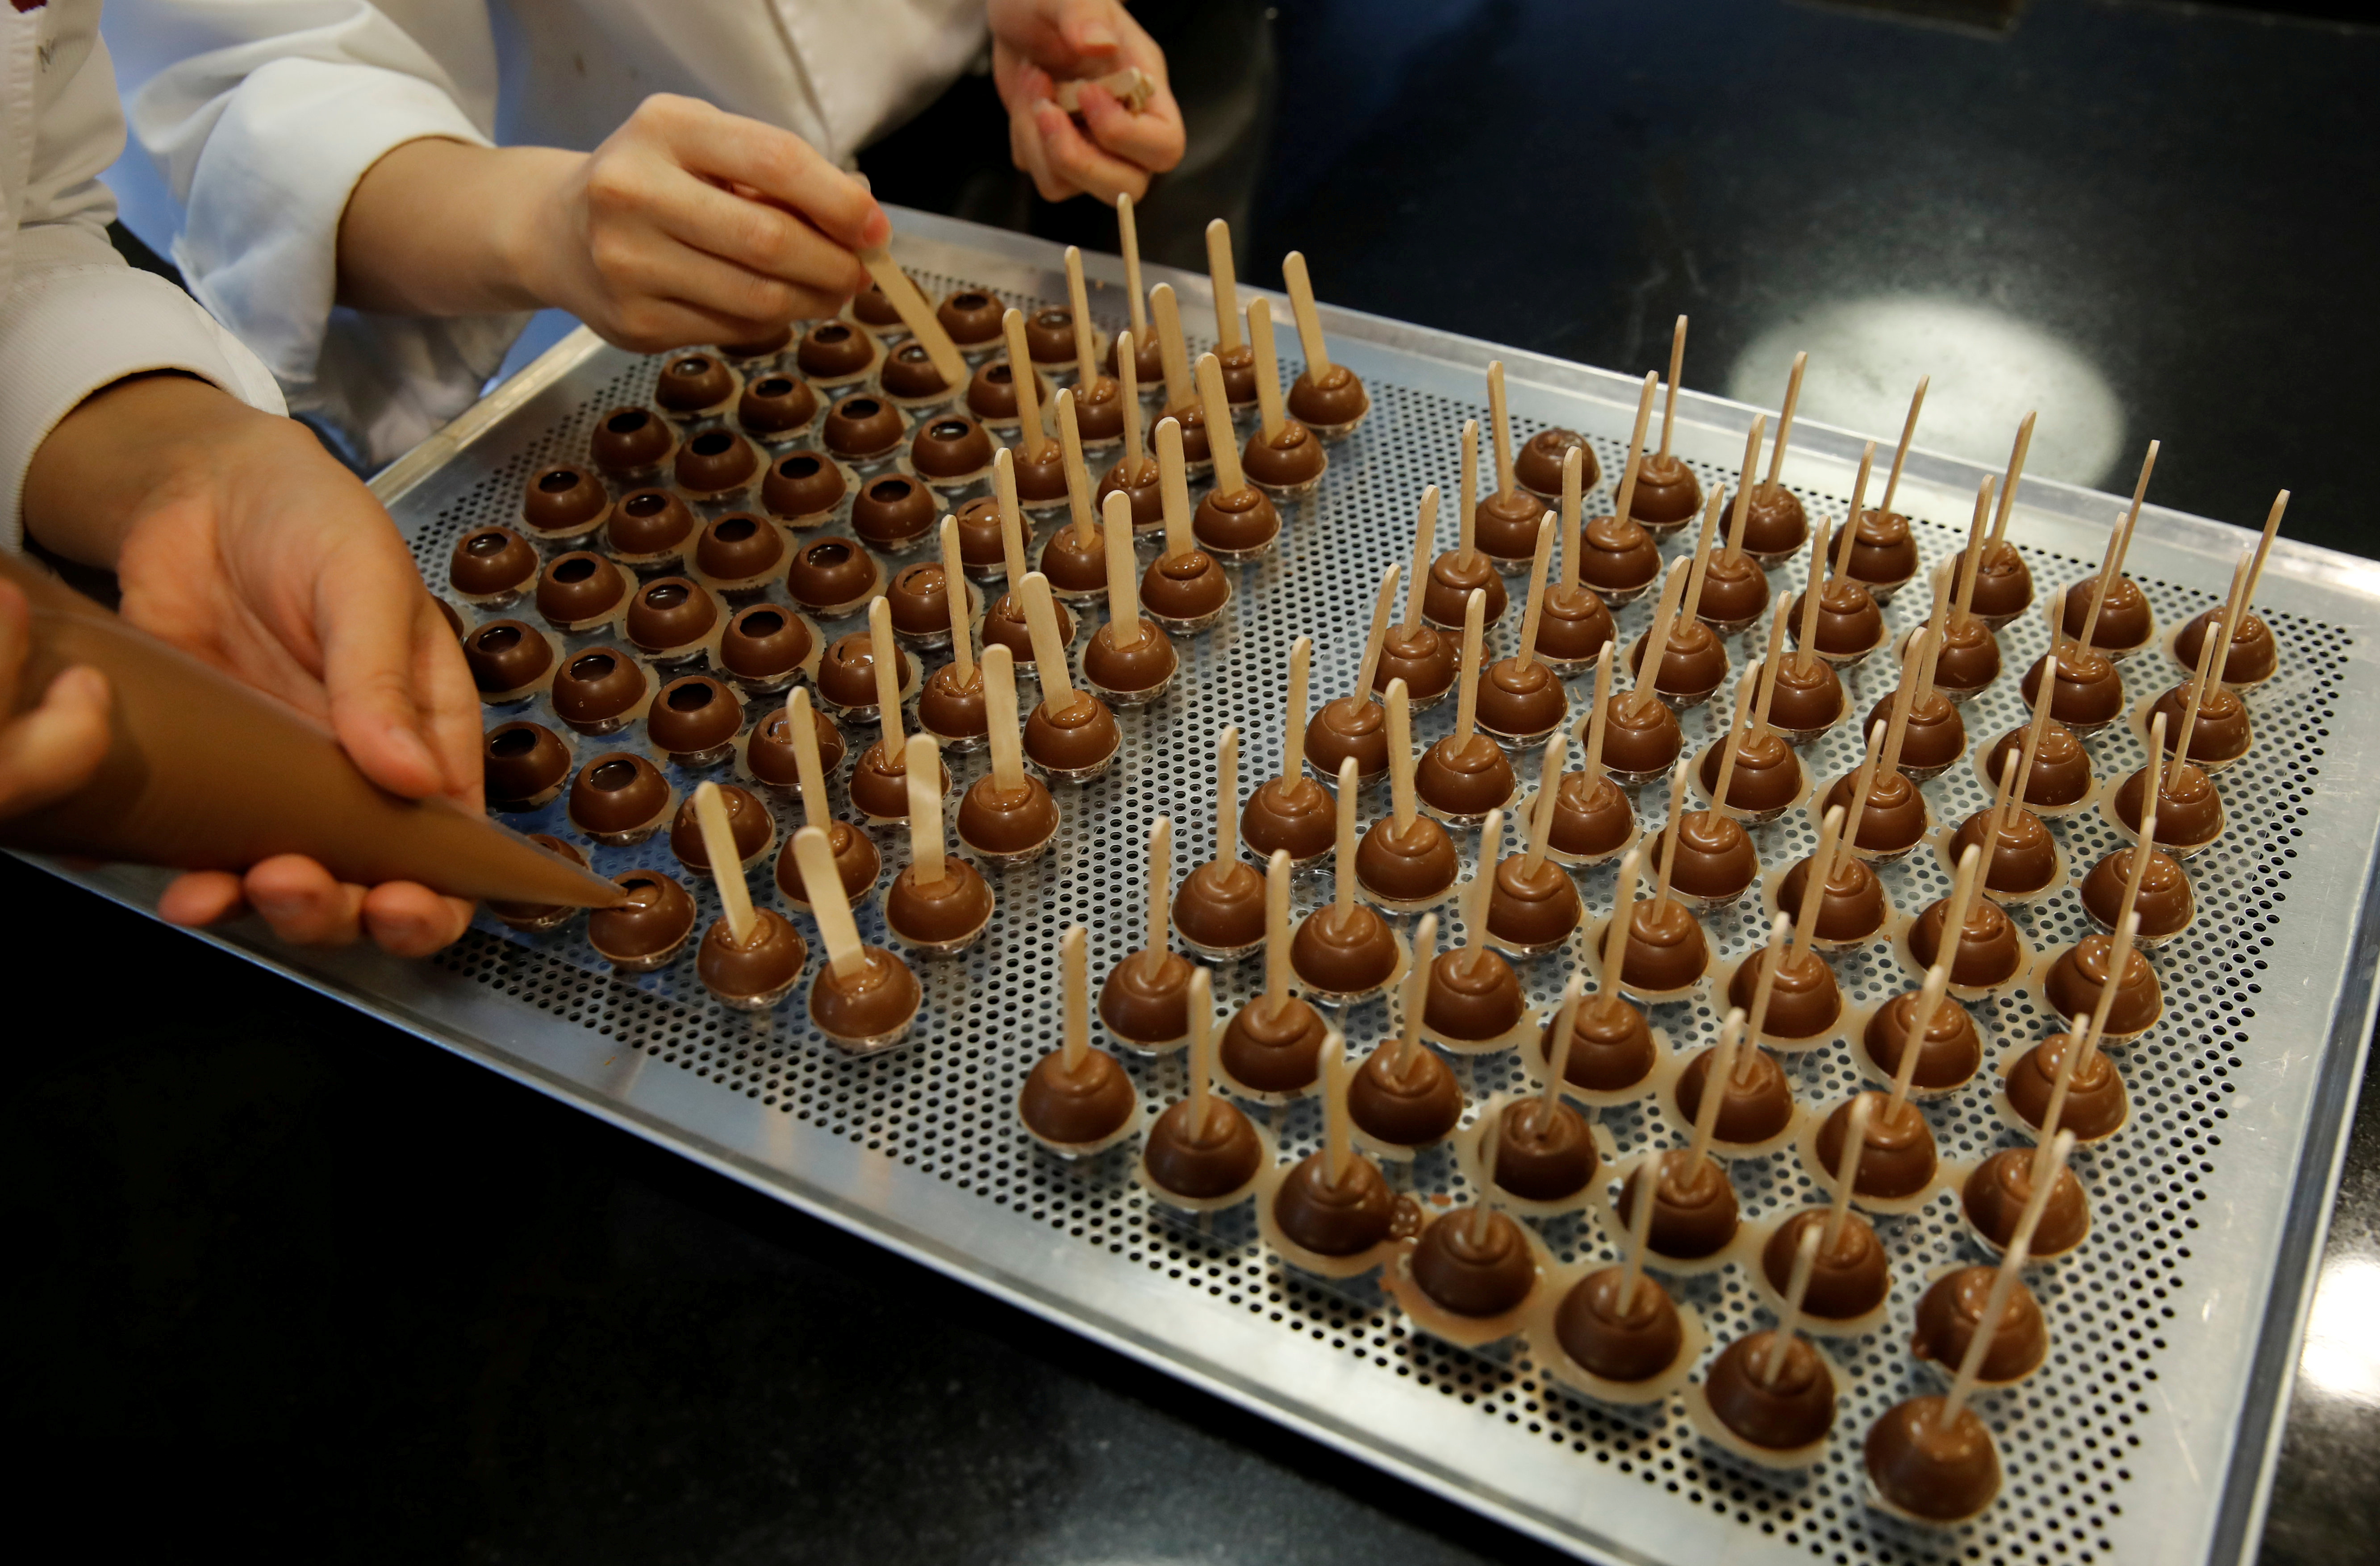   Empoyees of chocolate and cocoa product maker Barry Callebaut prepare chocolates after the company's annual news conference in Zurich, Switzerland November 7, 2018. REUTERS/Arnd Wiegmann/File Photo